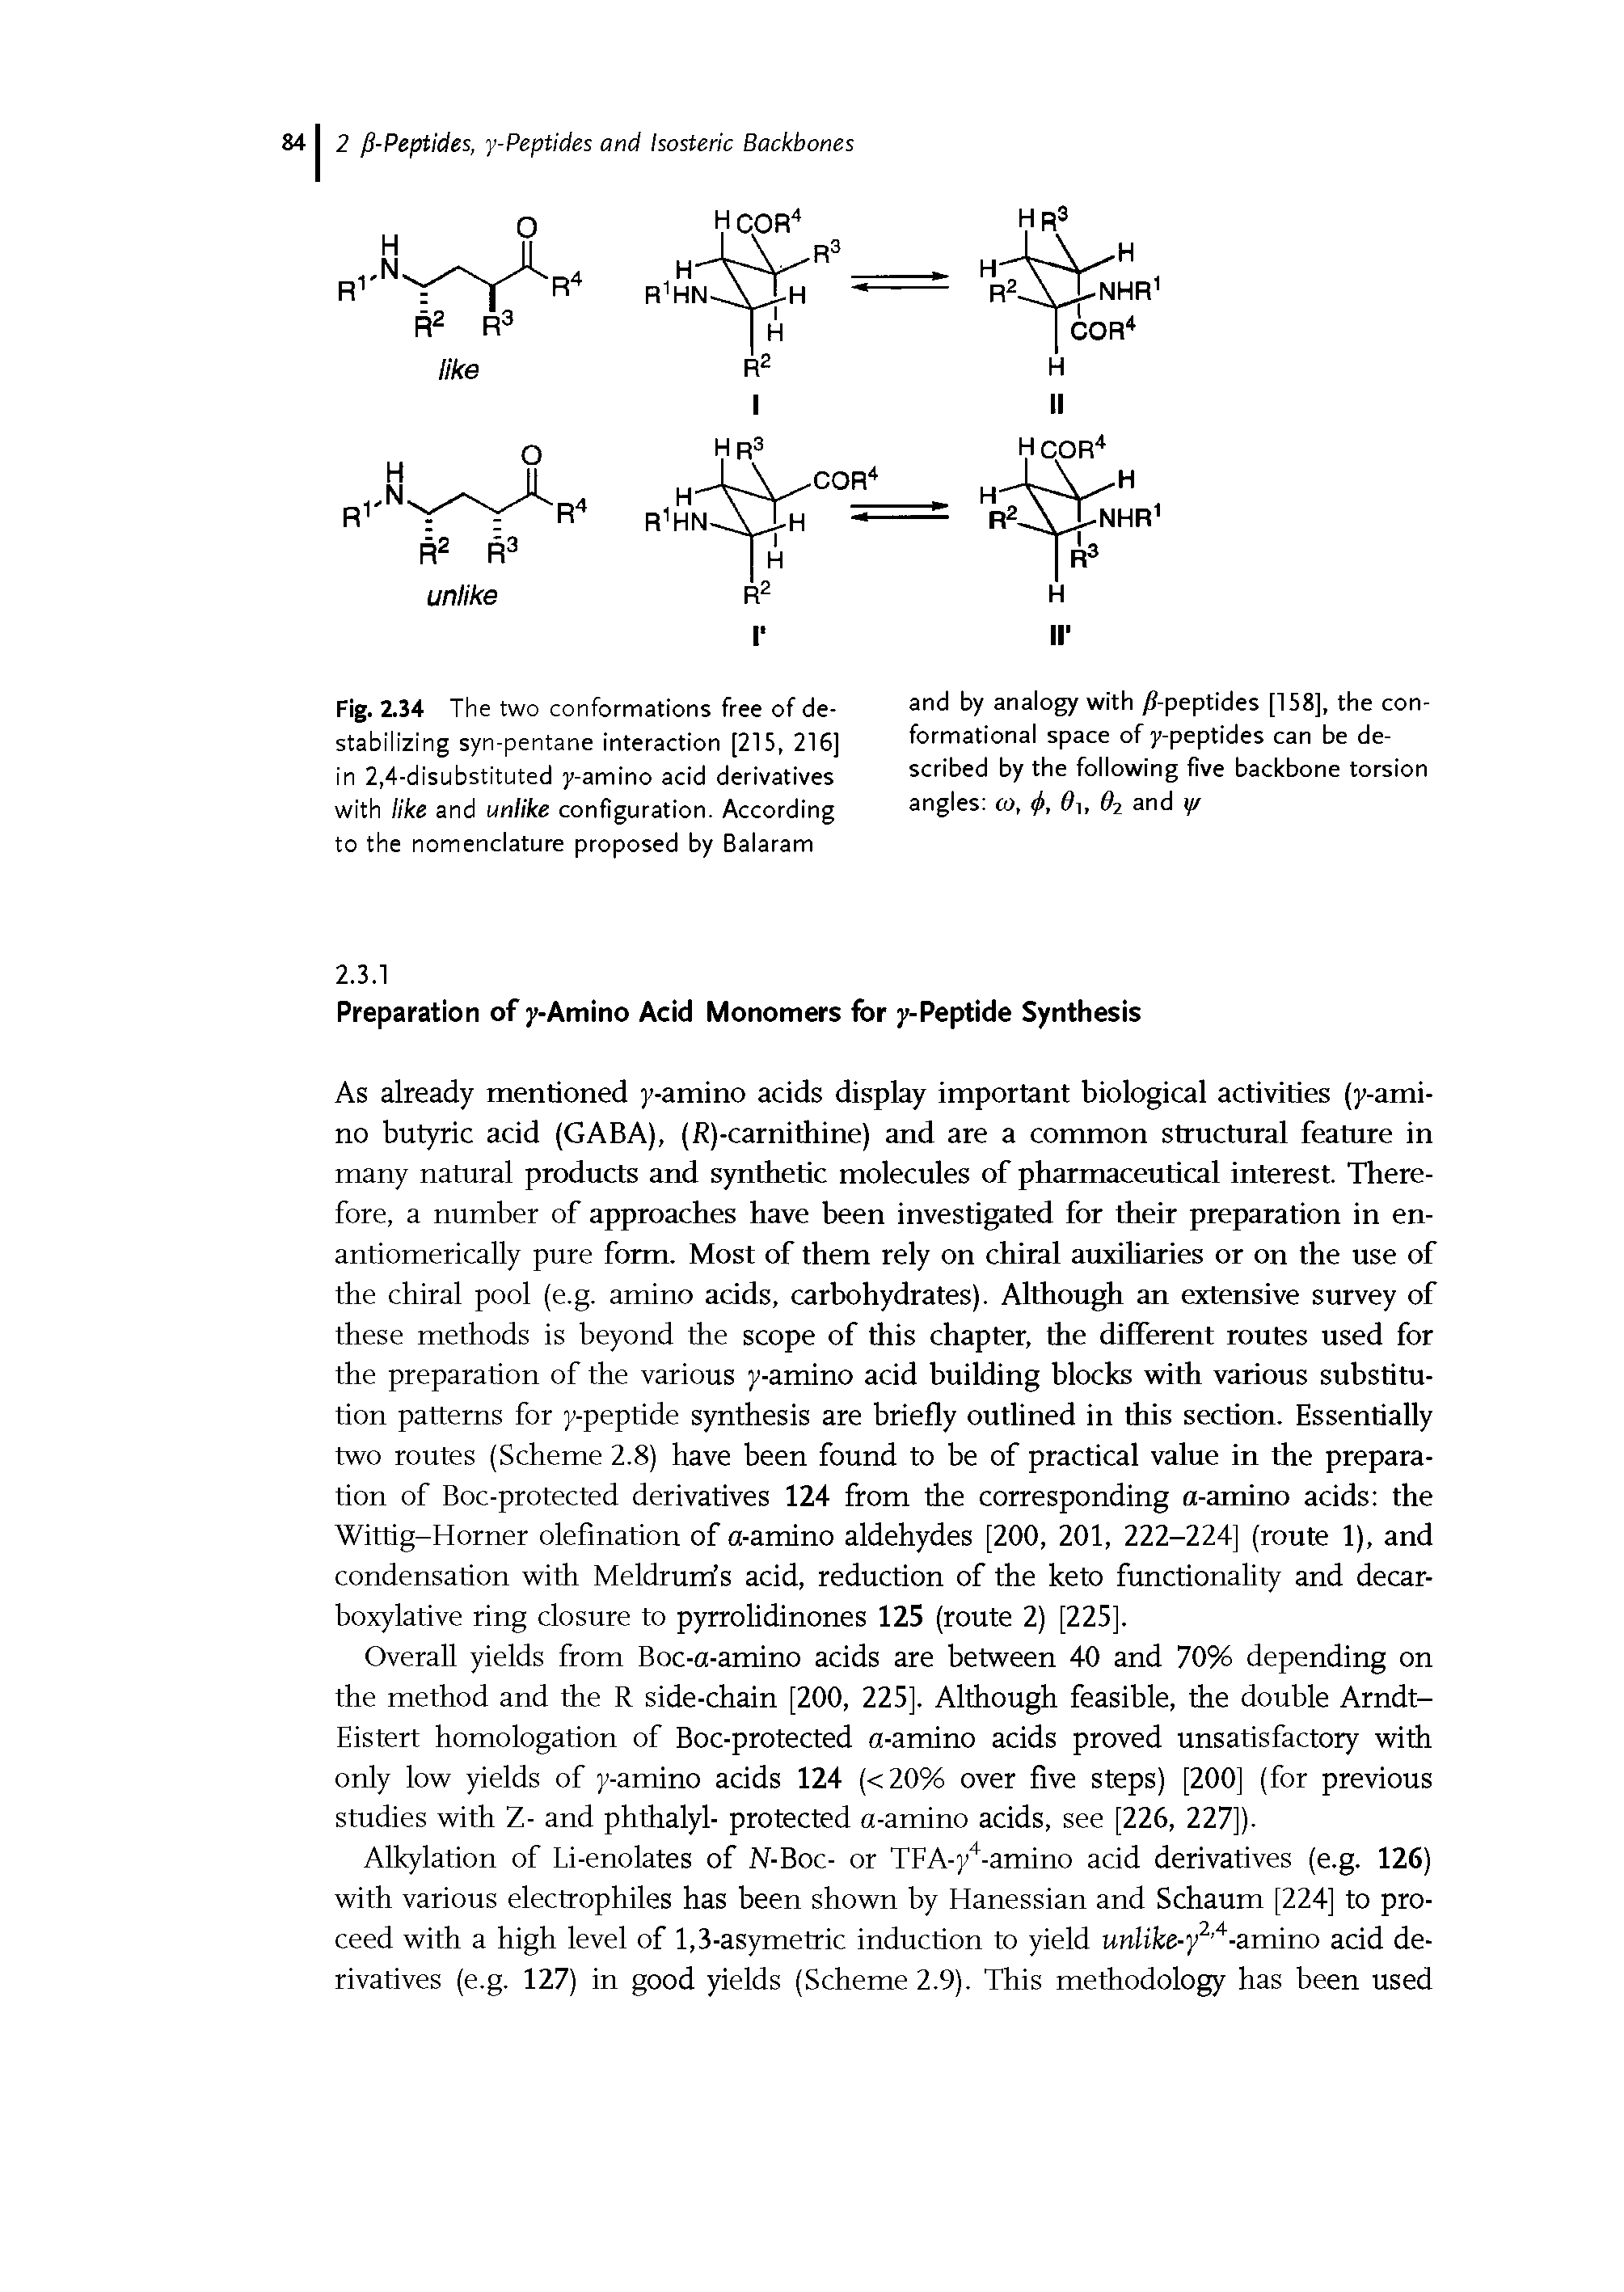 Fig. 2.34 The two conformations free of destabilizing syn-pentane interaction [215, 216] in 2,4-disubstituted y-amino acid derivatives with like and unlike configuration. According to the nomenclature proposed by Balaram...